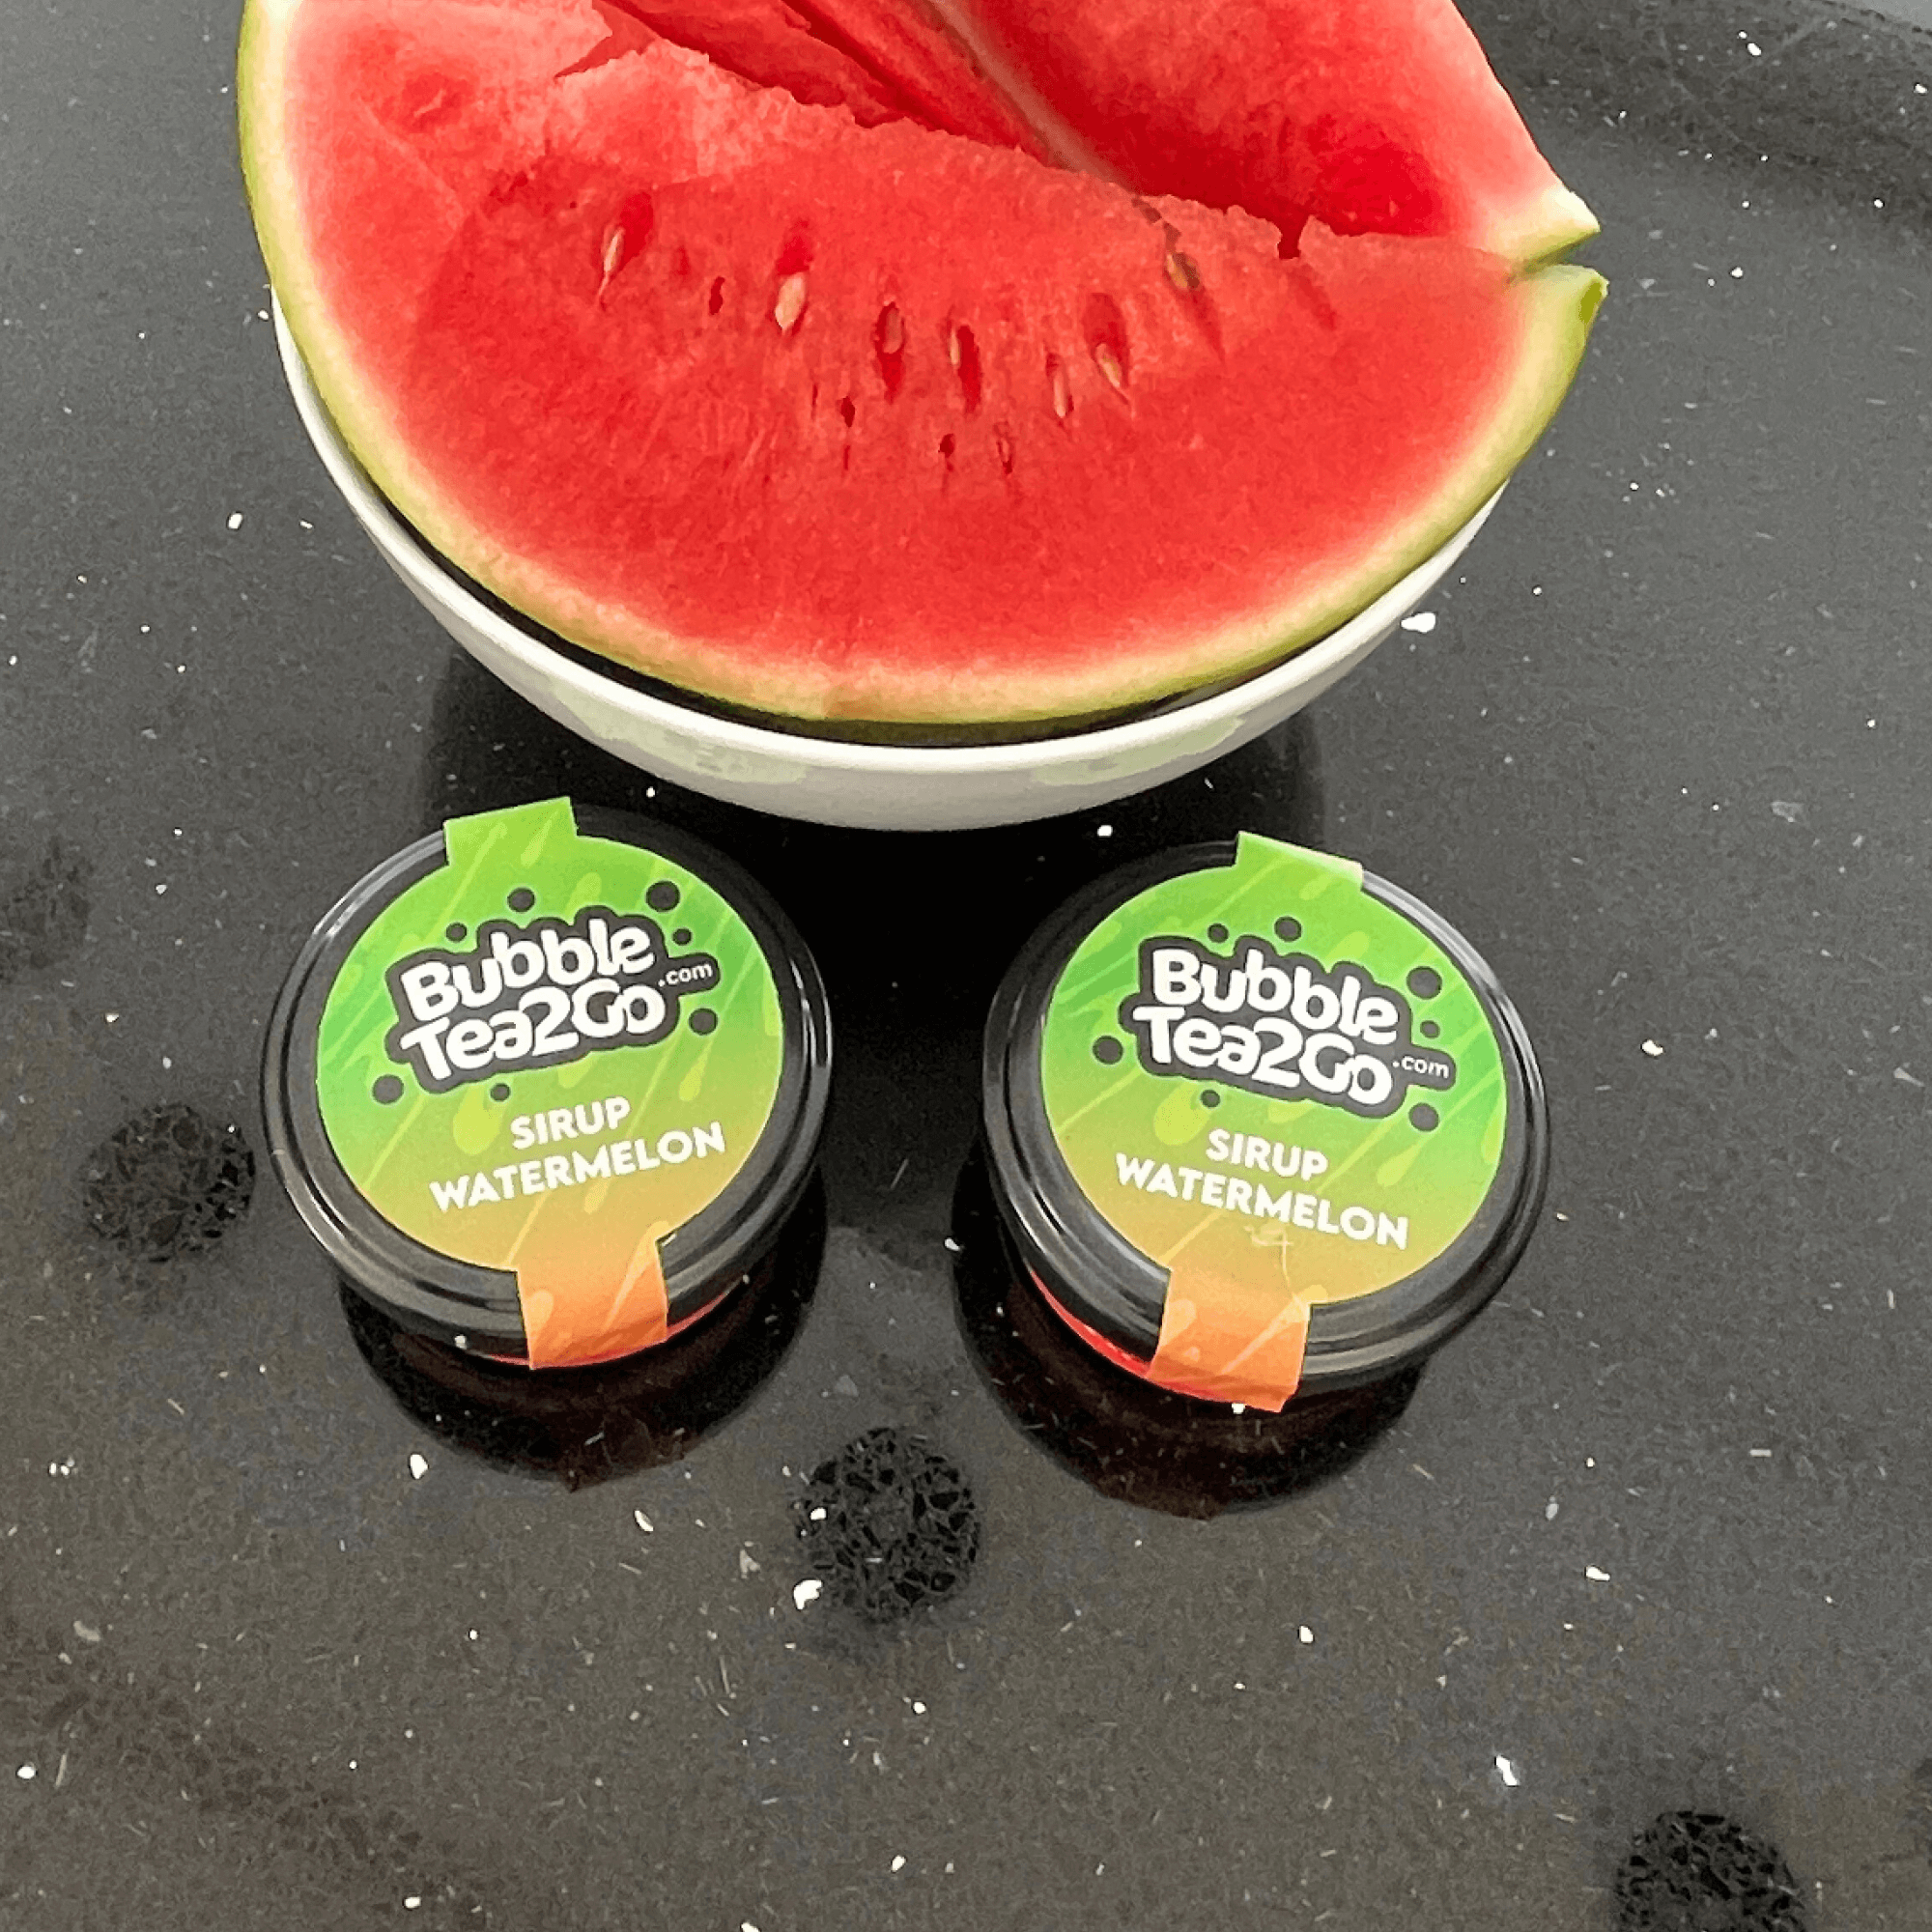 Syrup - Watermelon 2 servings (50g)